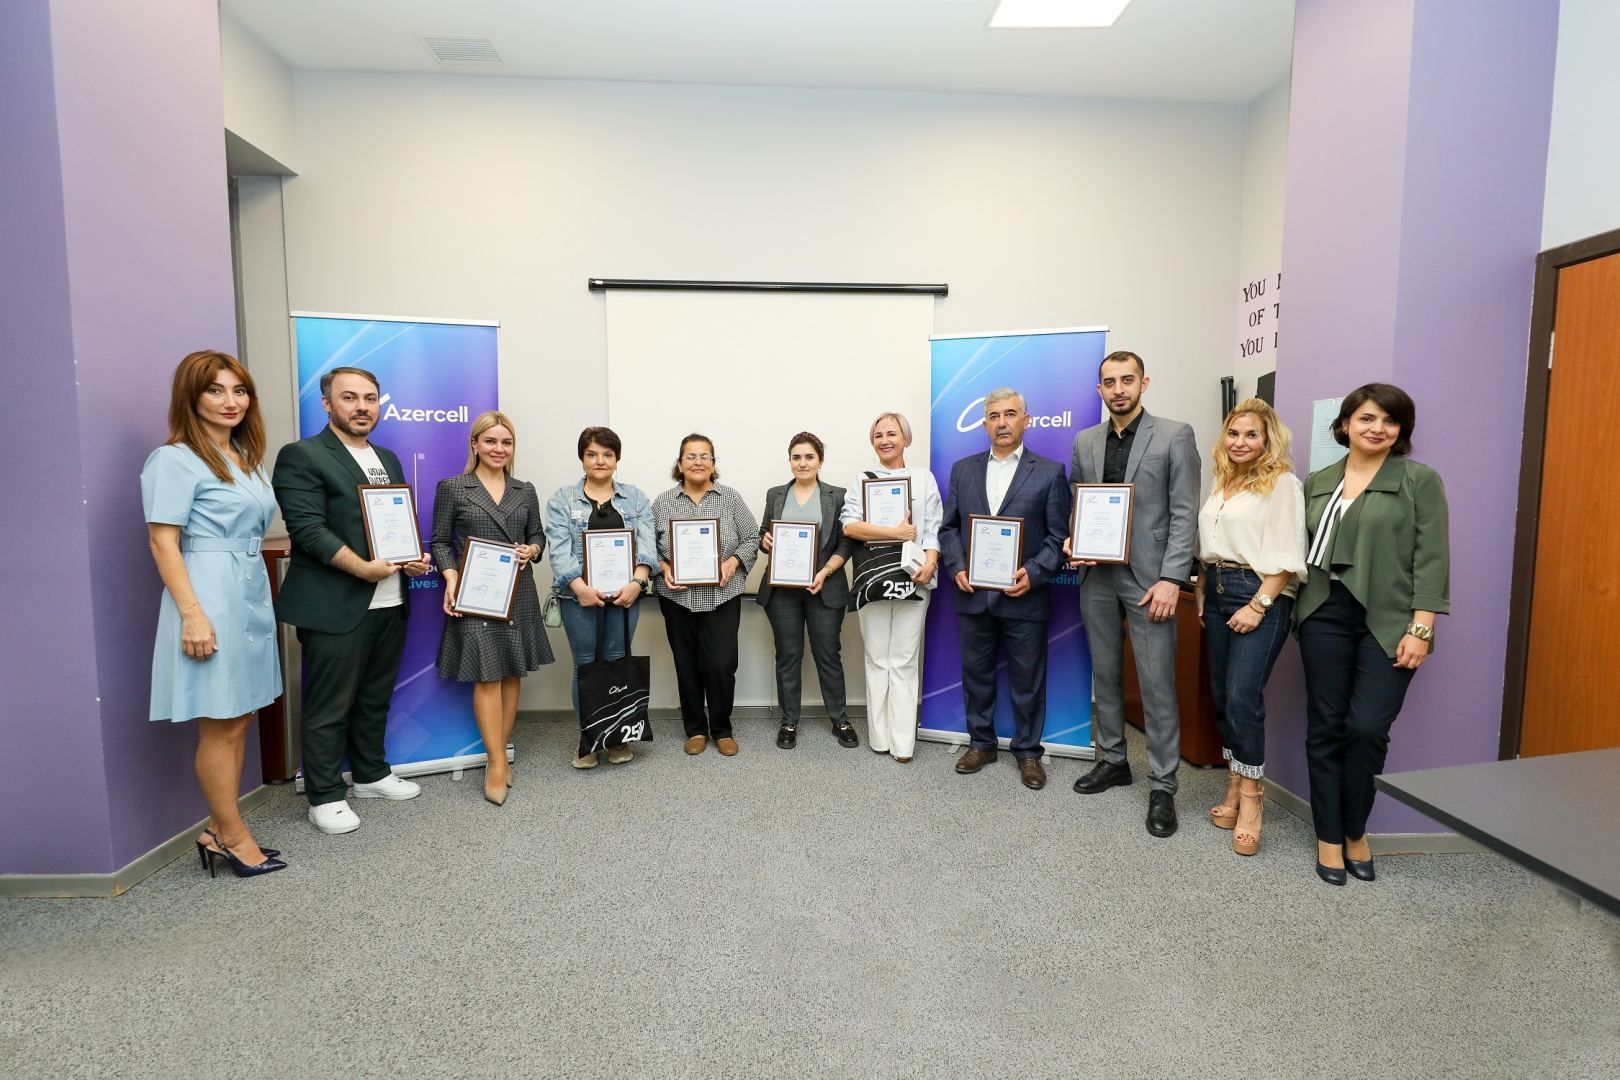 Azercell has awarded the best journalists [PHOTO]